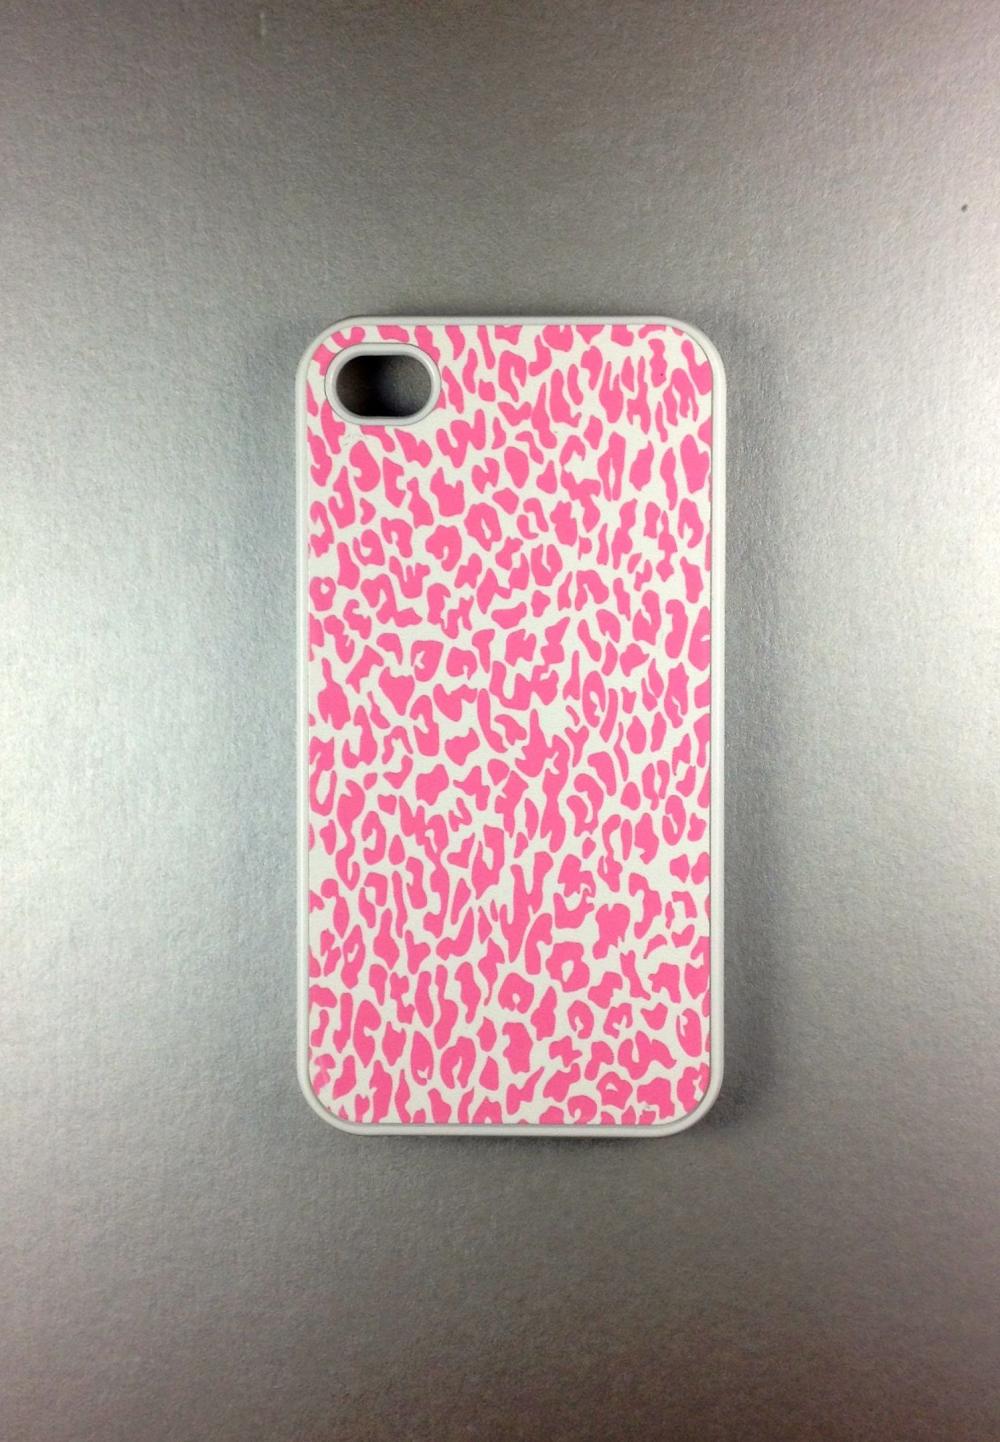 Iphone 4 Case - Pink Leopard Iphone 4s Case, Iphone Case, Iphone 4 Cover